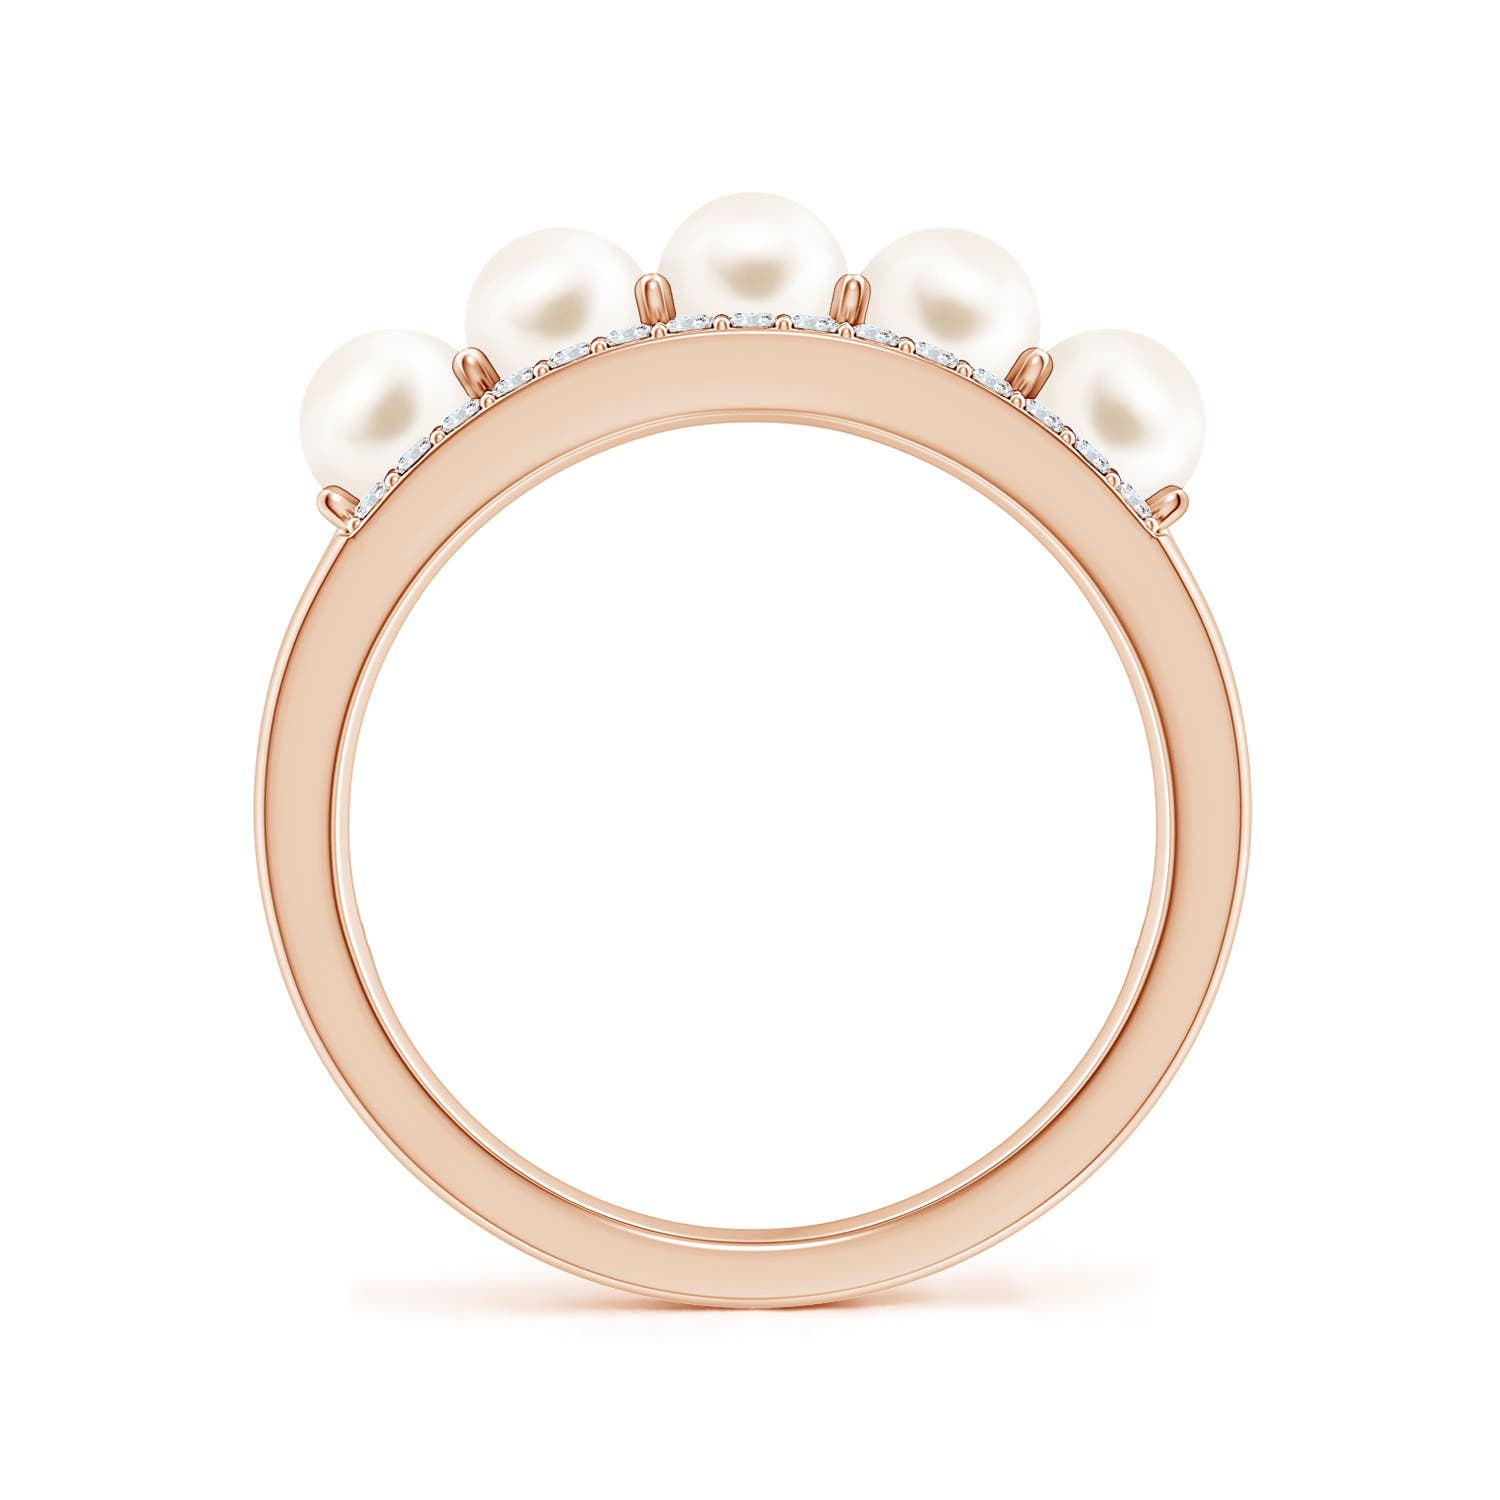 AAA / 2.24 CT / 14 KT Rose Gold